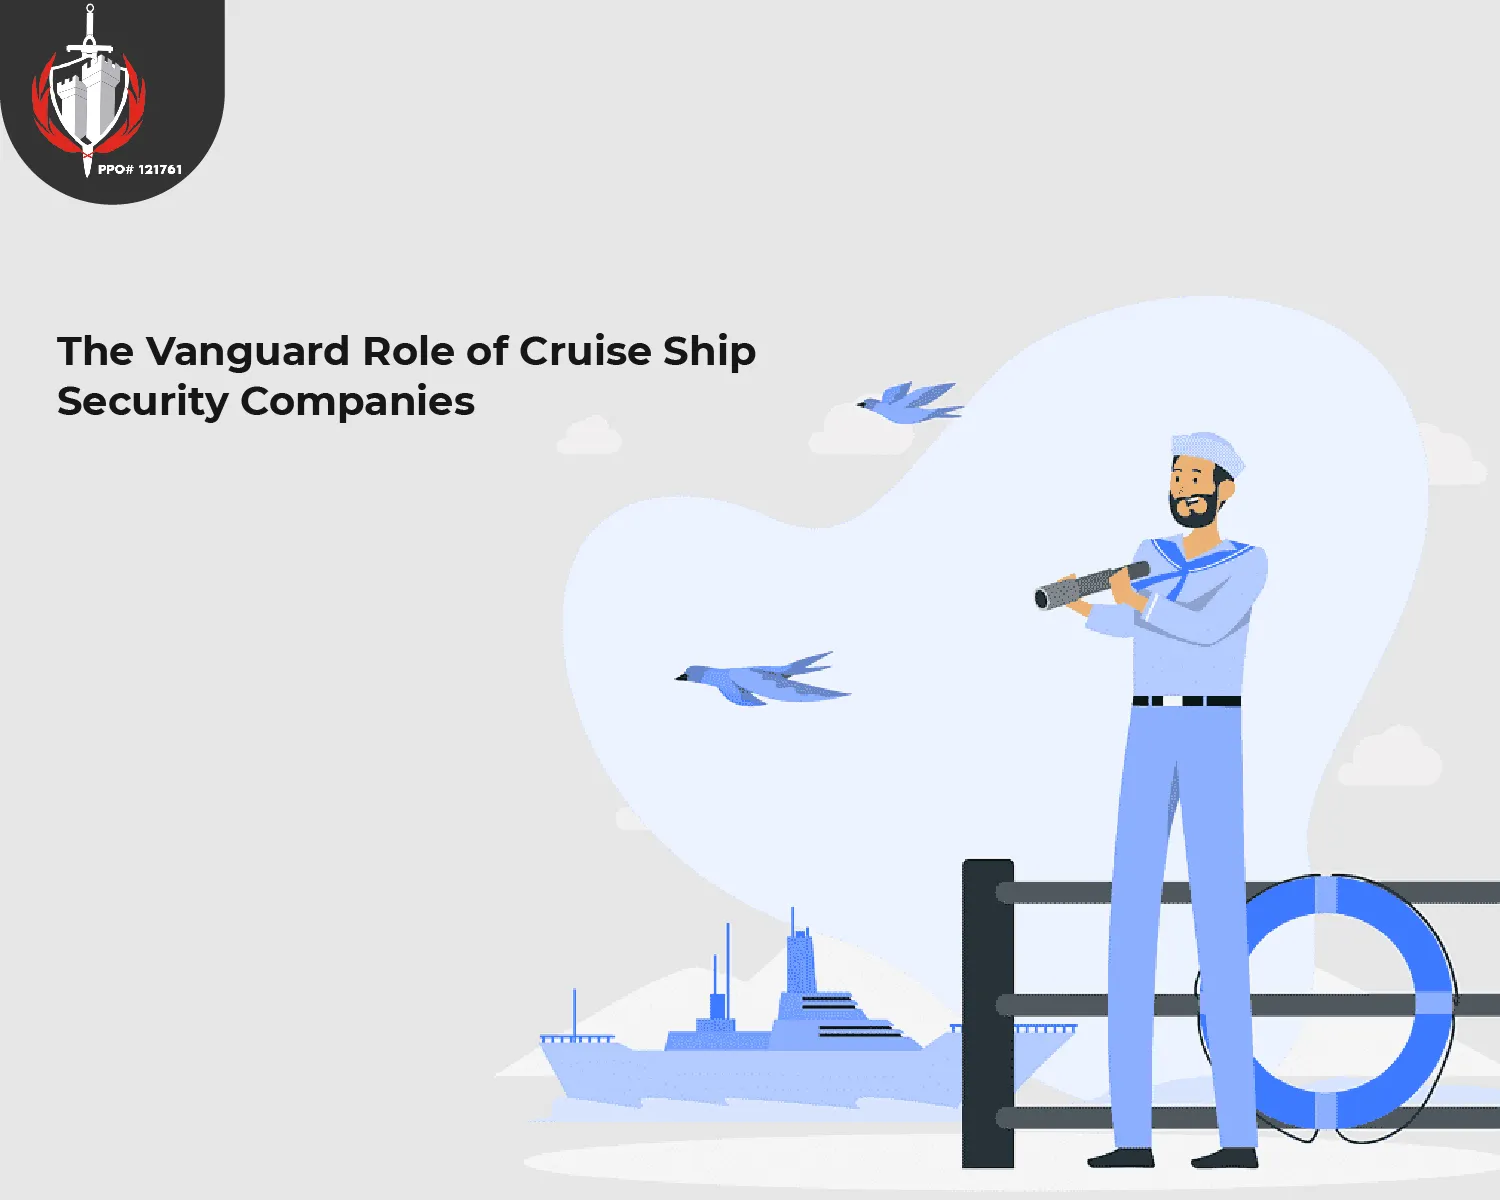 The Vanguard Role of Cruise Ship Security Companies